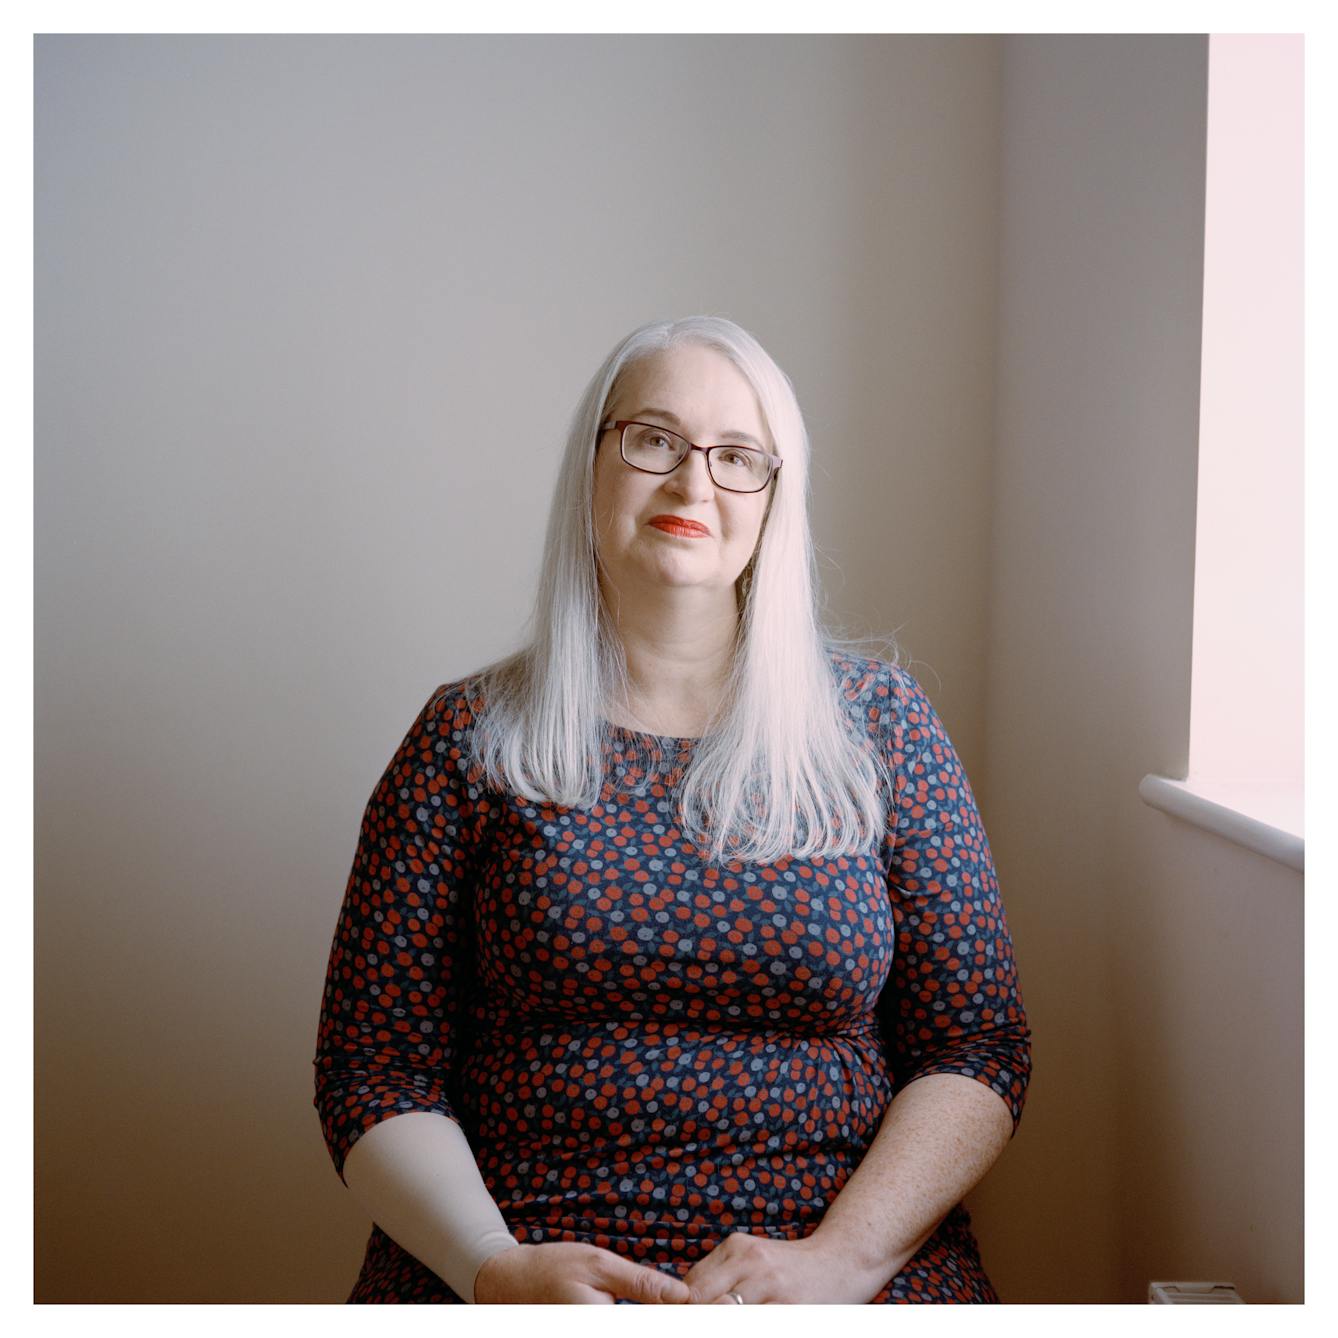 Portrait photograph of Louise, a woman with long grey hair. She is sitting down and looking directly at the camera with a neutral expression. 

She is wearing black rectangular glasses, red lipstick and a blue and red floral patterned dress. Her hands are clasped on her lap. There is a white wall behind her, and a window ledge. 